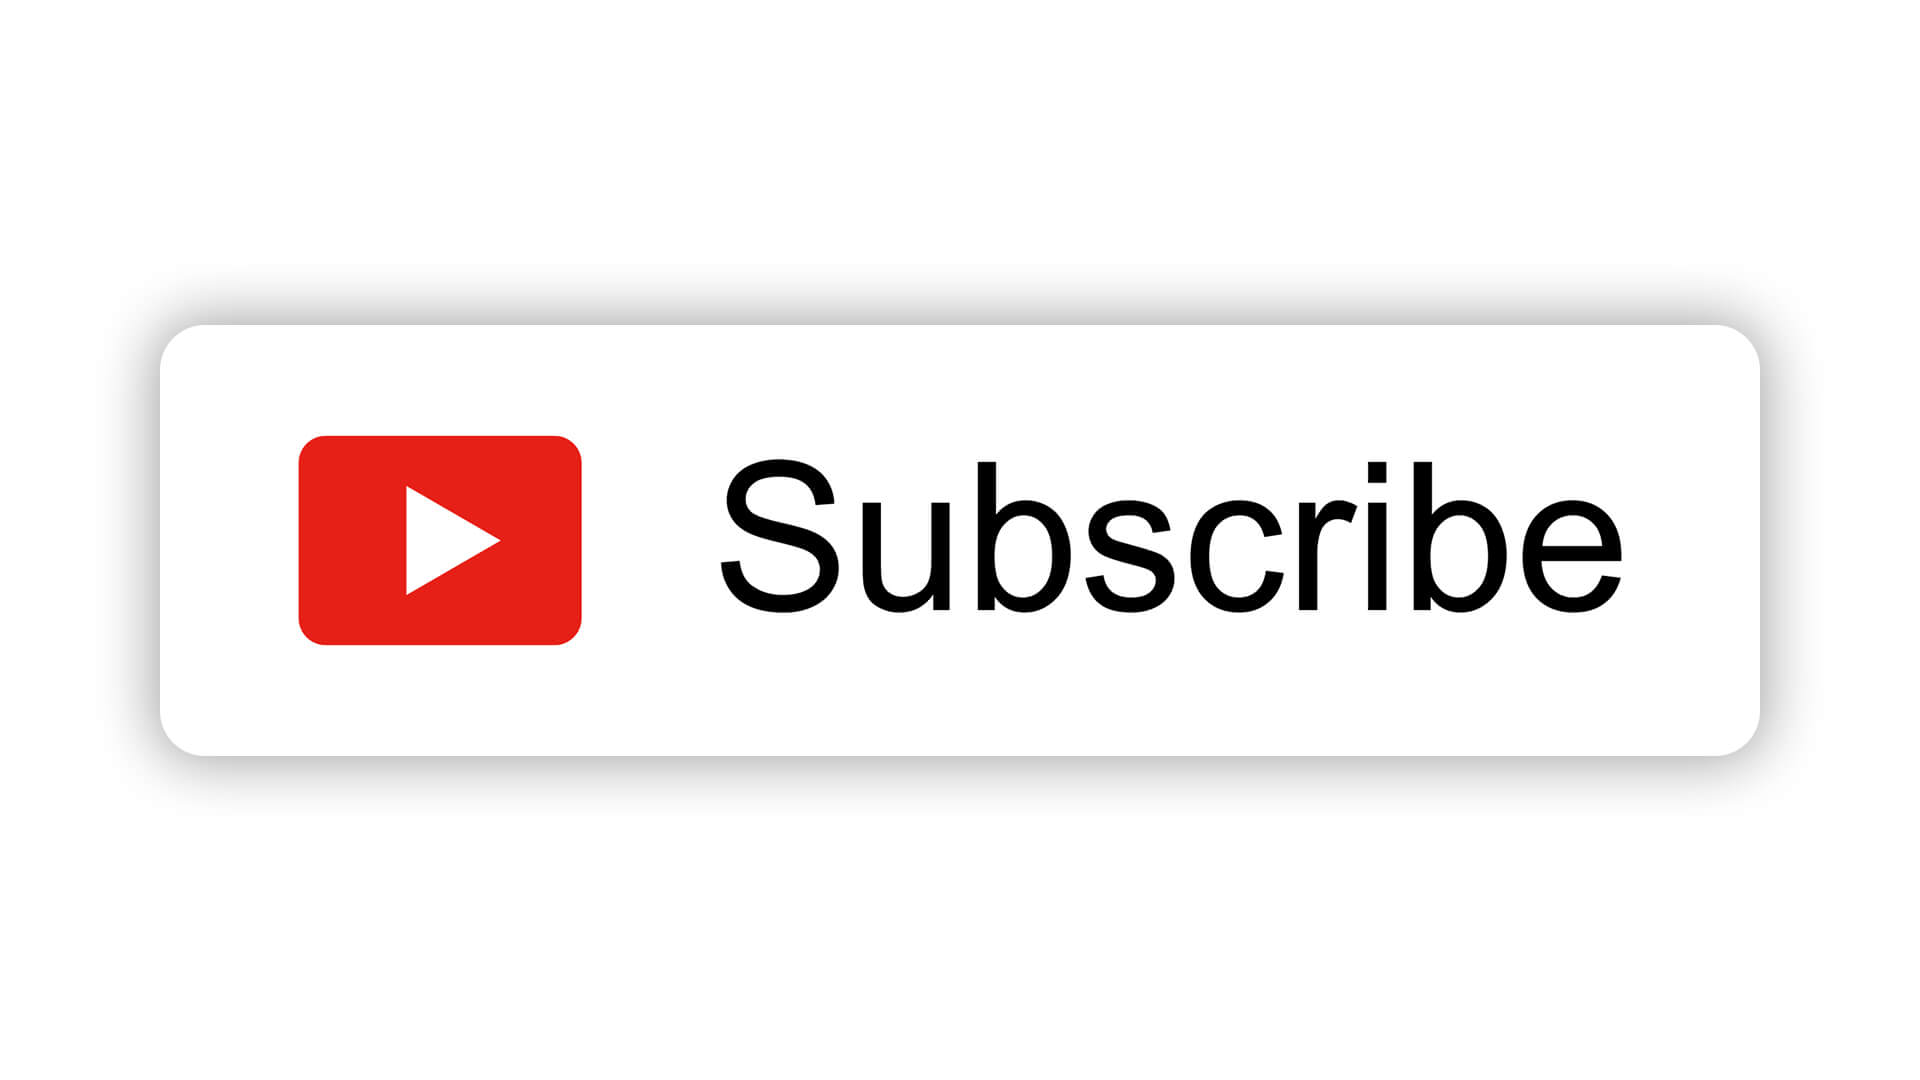 Free-YouTube-Subscribe-Button-Download-Design-Inspiration-By-AlfredoCreates-15